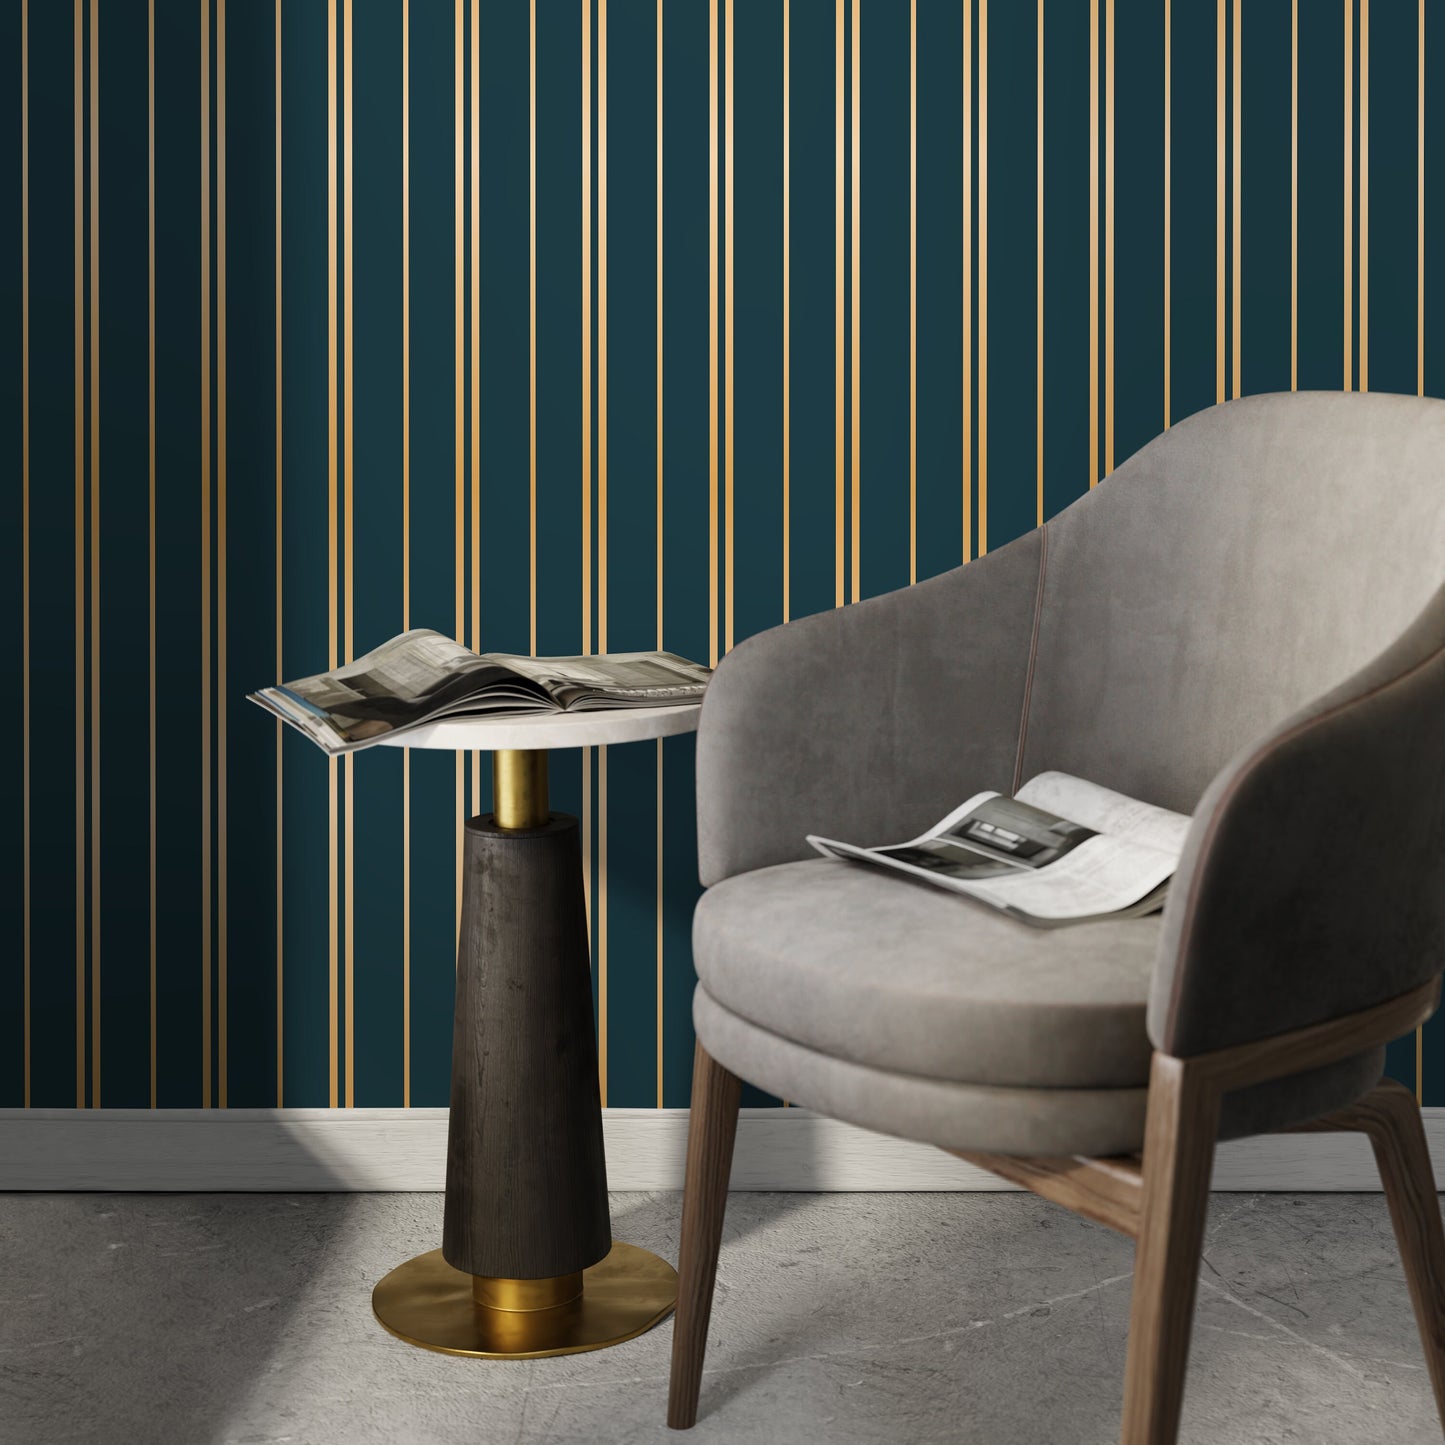 Gold and Green Wallpaper Striped Wallpaper Peel and Stick and Traditional Wallpaper - D770